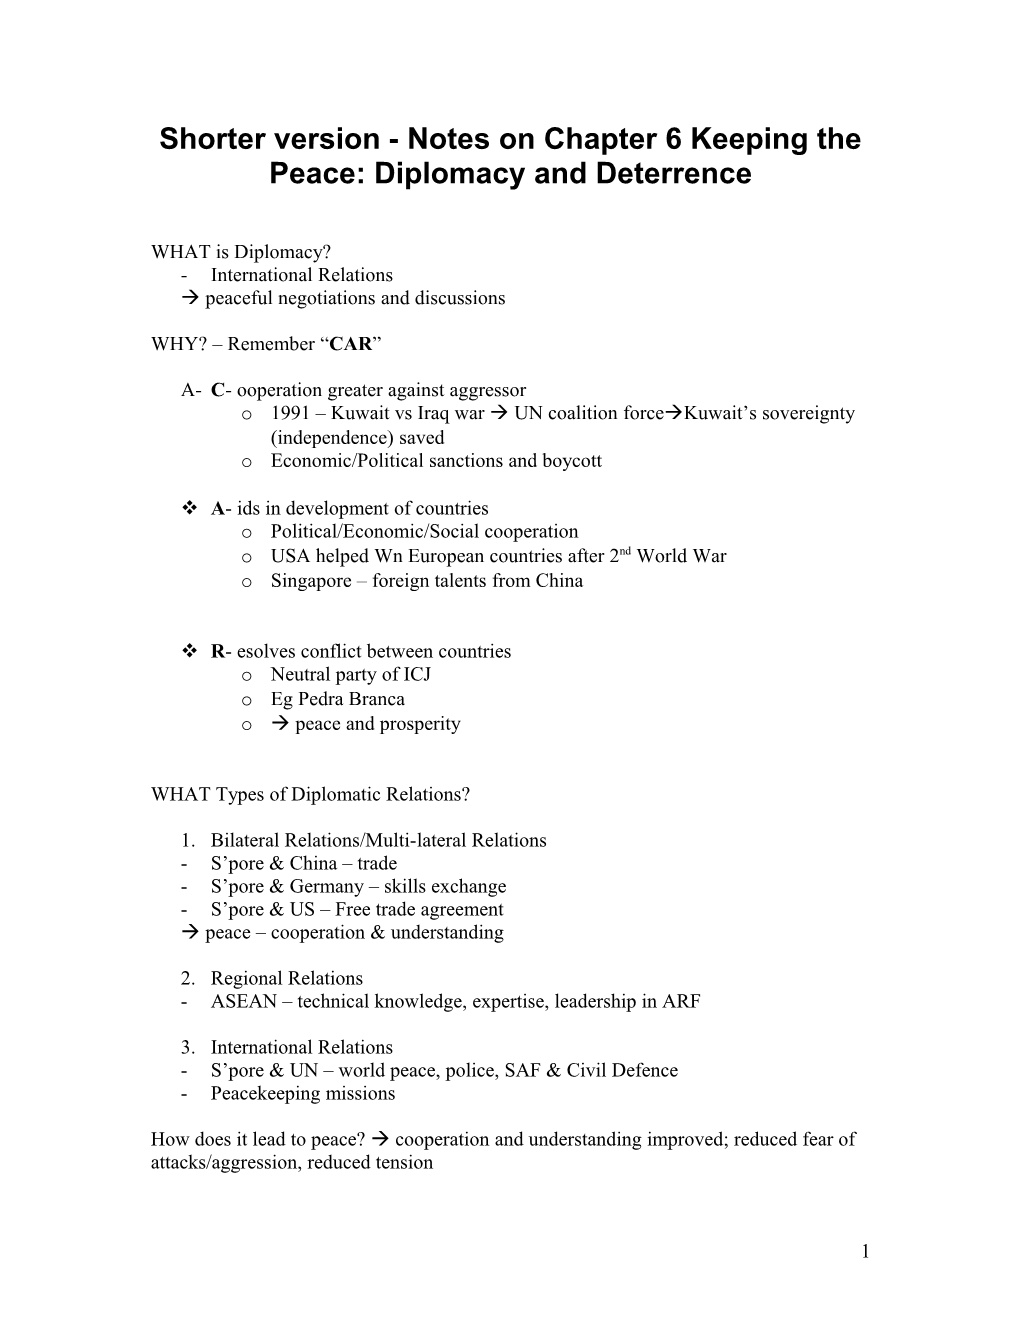 Shorter Version - Notes on Chapter 6 Keeping the Peace: Diplomacy and Deterrence